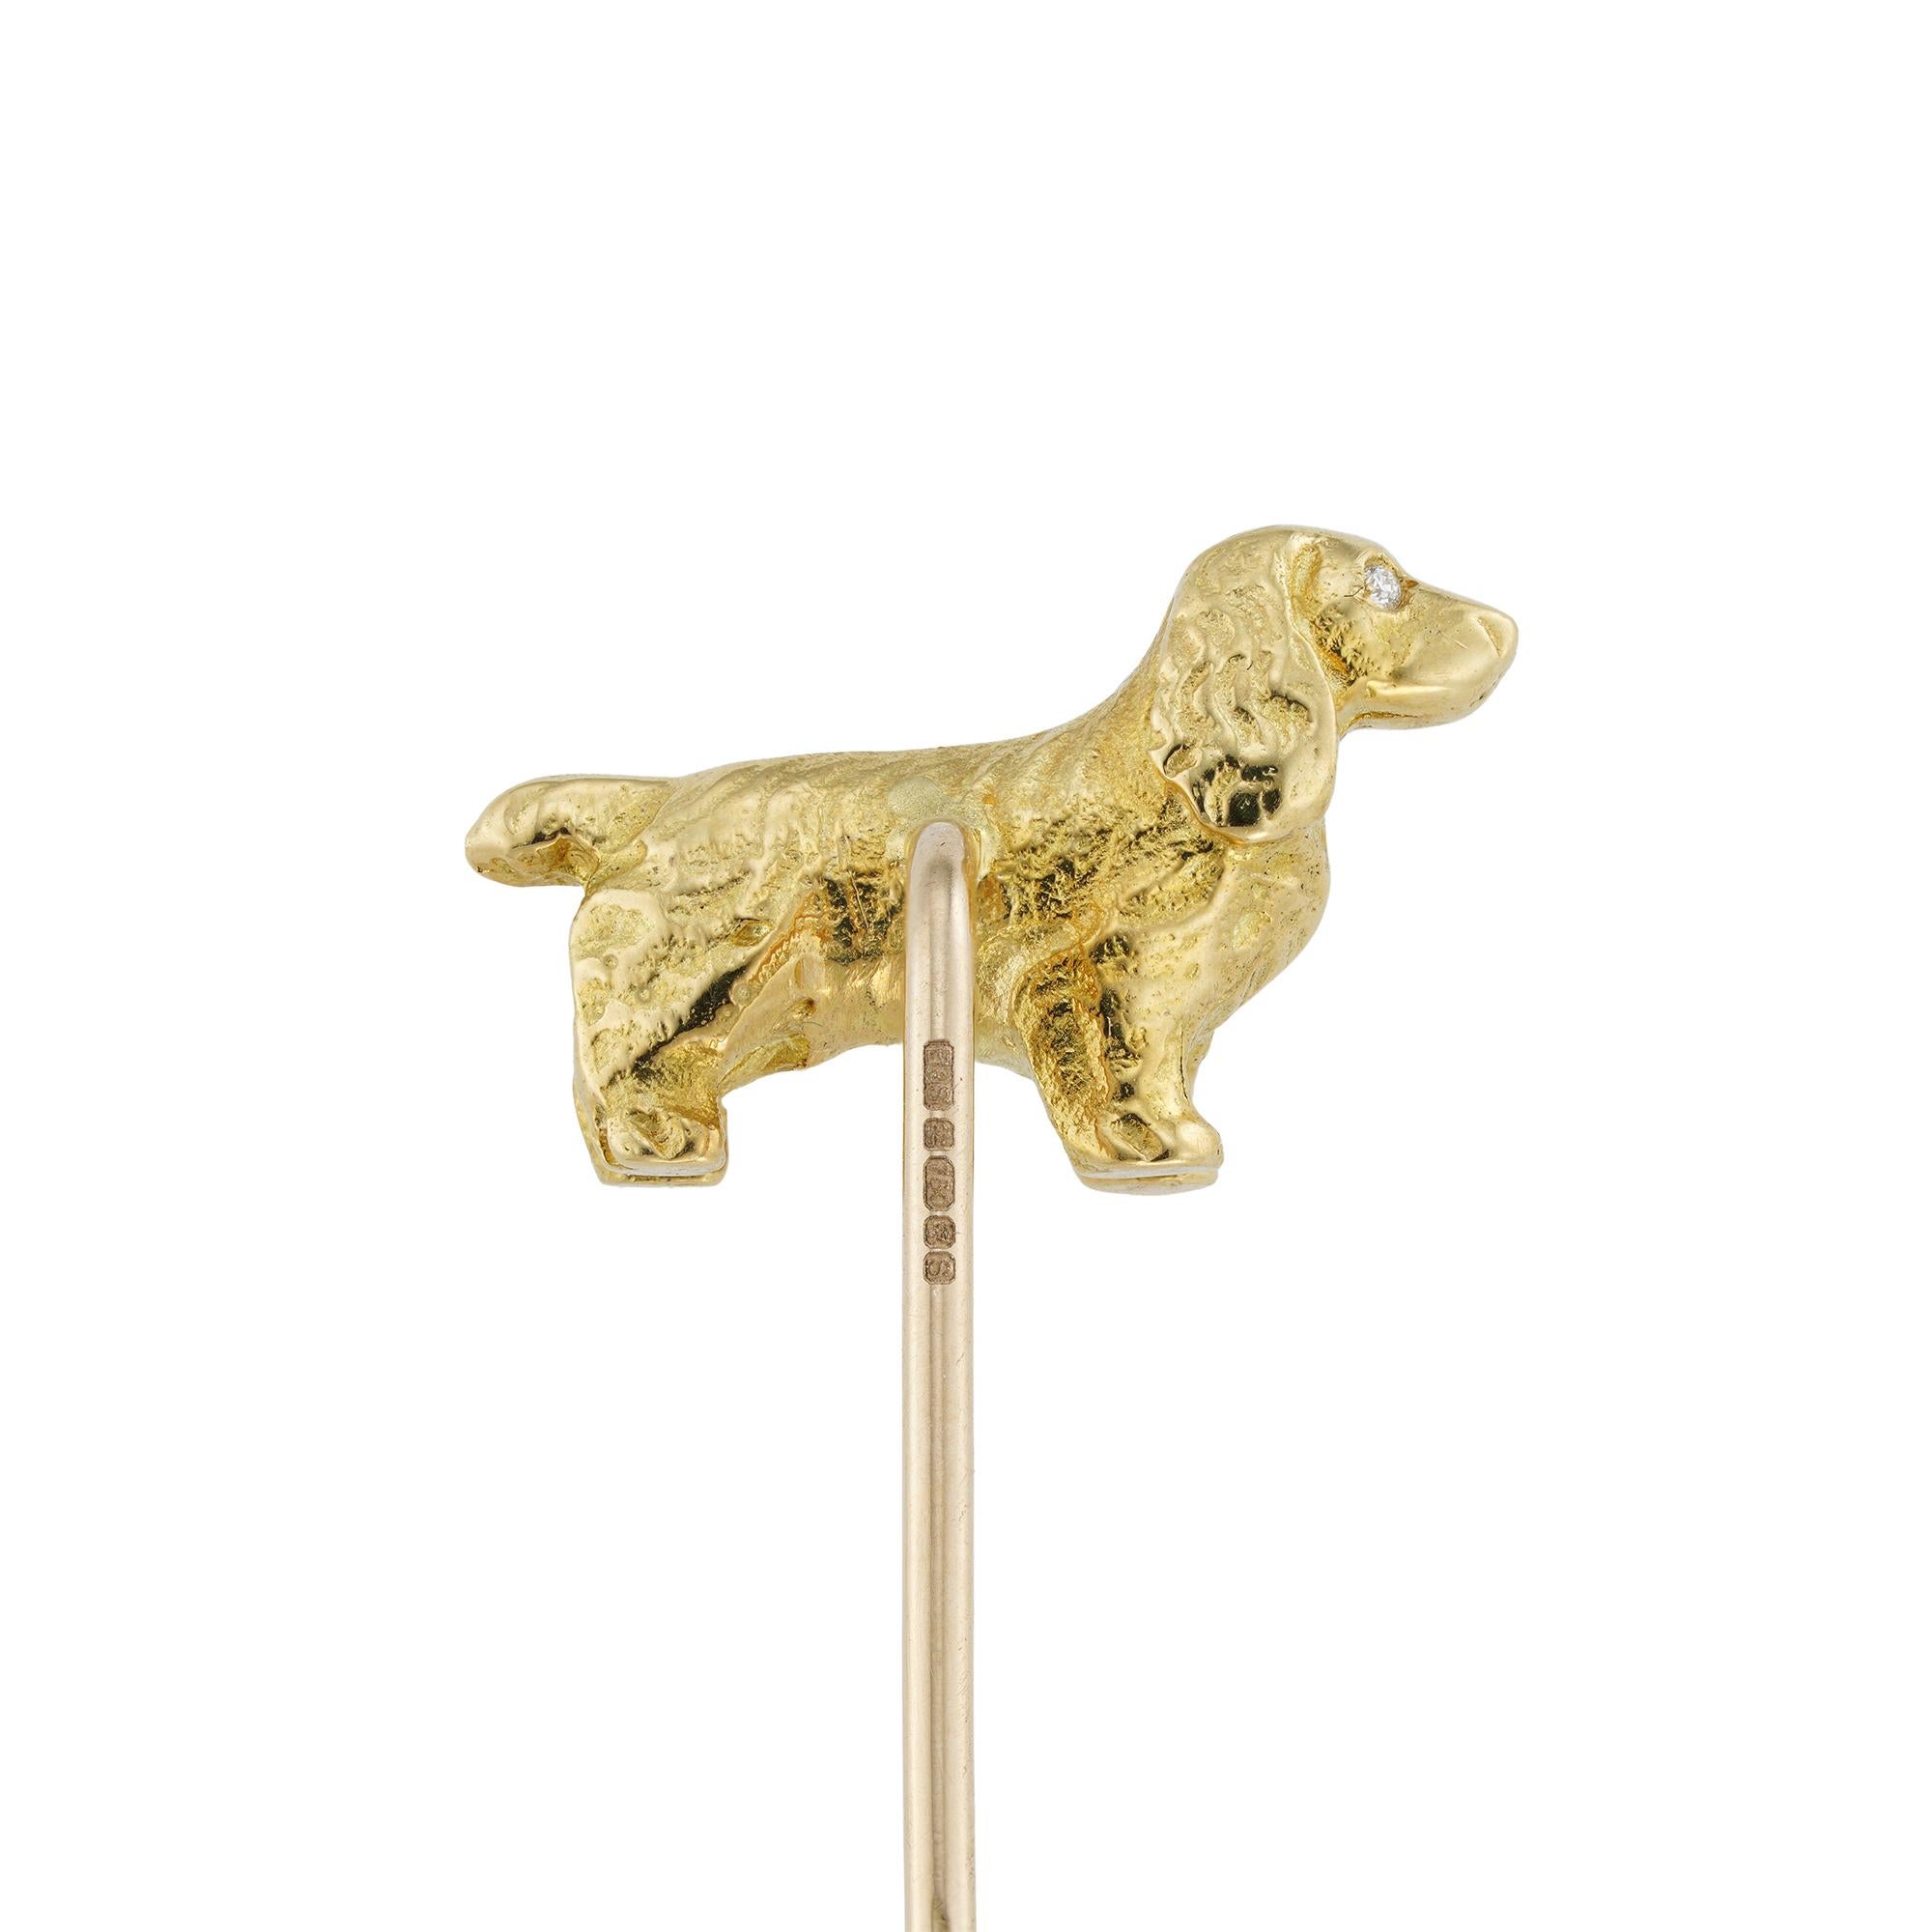 A yellow gold stickpin, the finial in the form of a spaniel, all set in yellow gold, hallmarked 18 carat gold, London, made by Bentley & Skinner, measuring 1.8 x 1.2cm the pin 6.5cm long, gross weight 6.2 grams.
This playful yellow gold spaniel